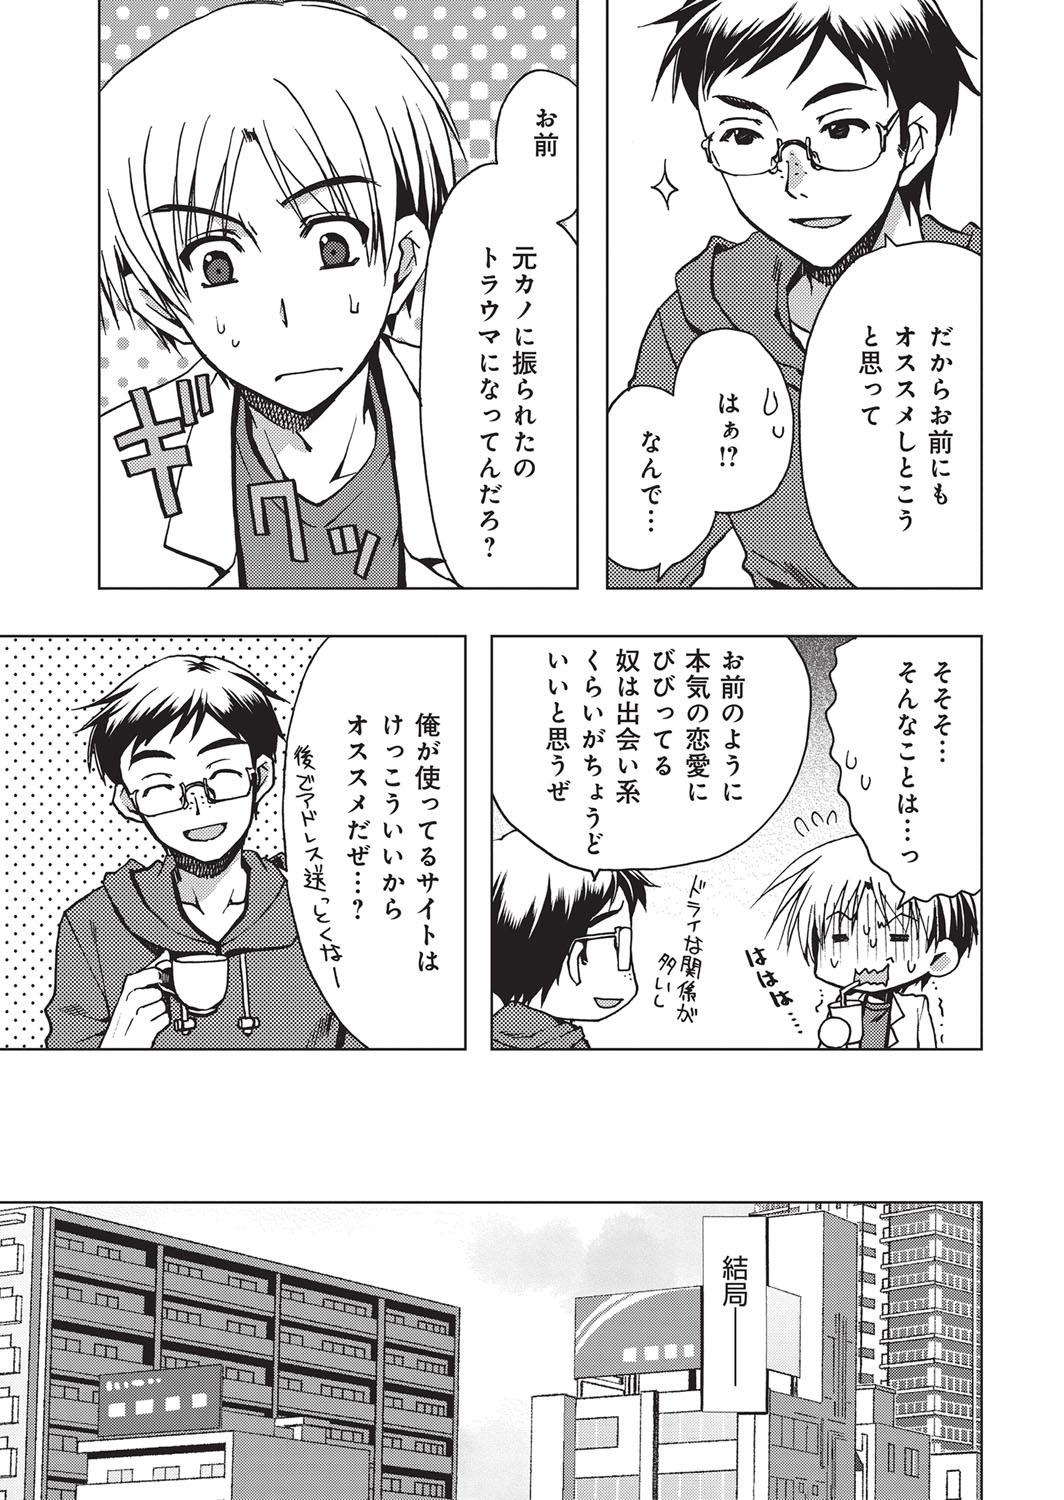 Shoes YOUNG Kyun! Vol. 1 Retro - Page 8